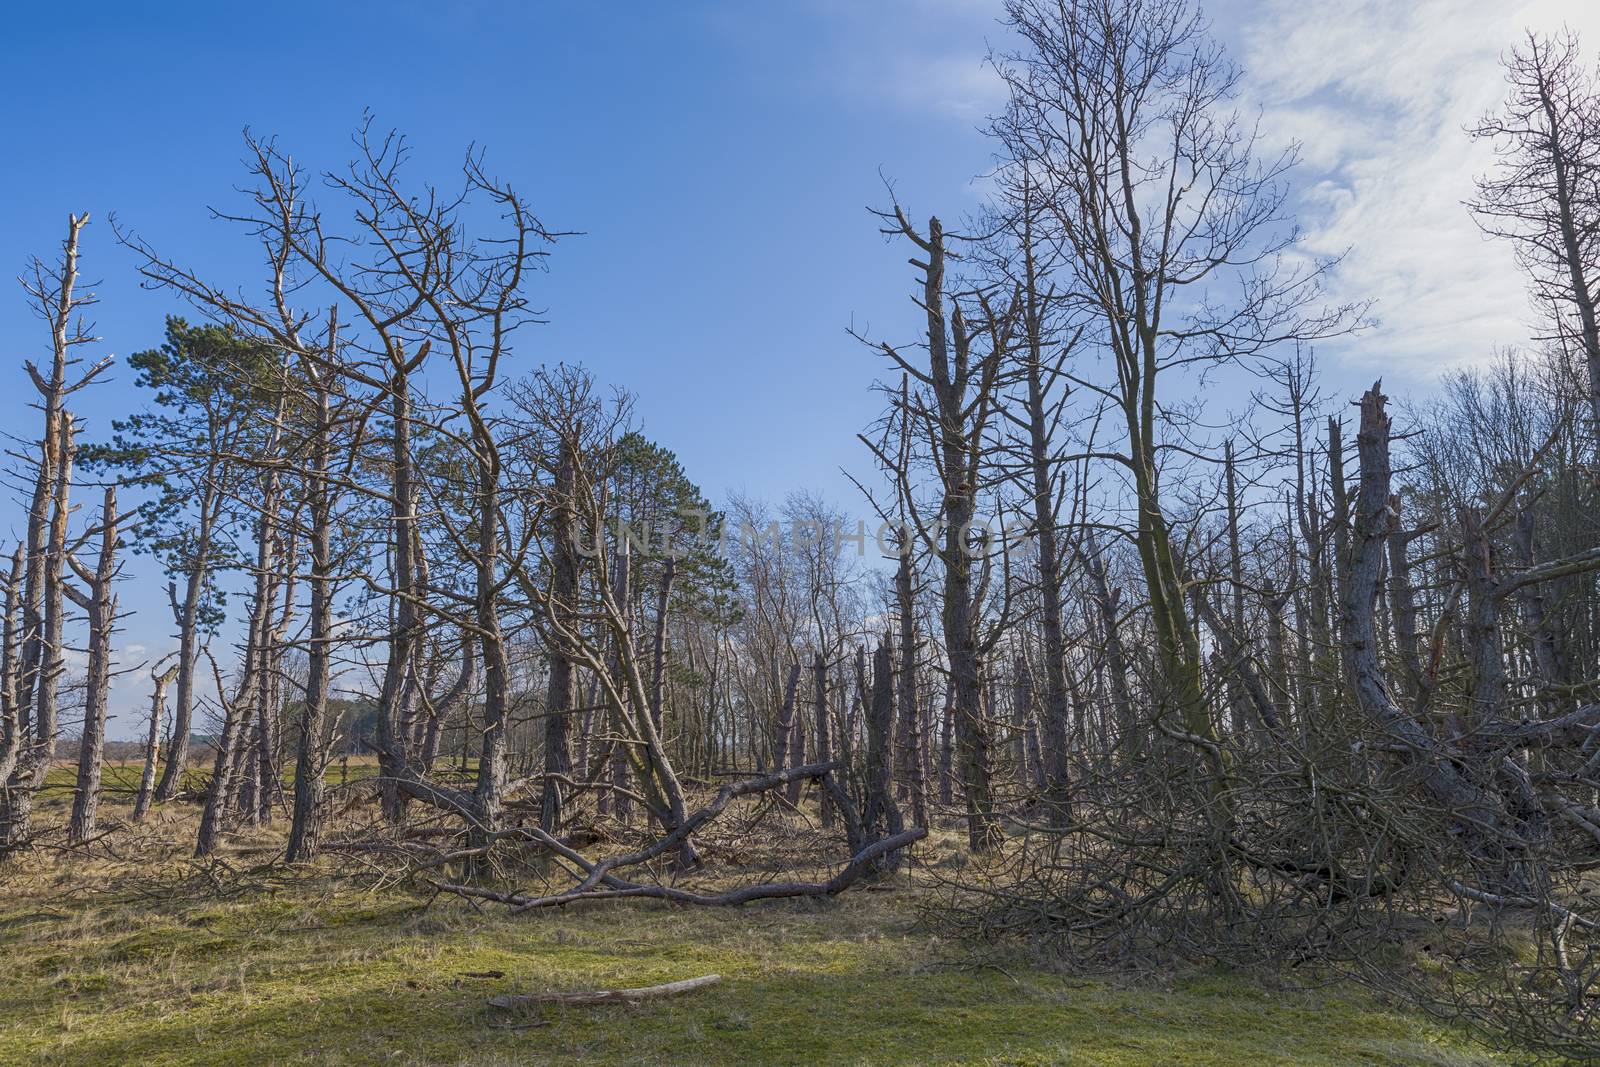 In the national park awd in holland the trees suffer from the dry year 2019 and all the trees look dead now